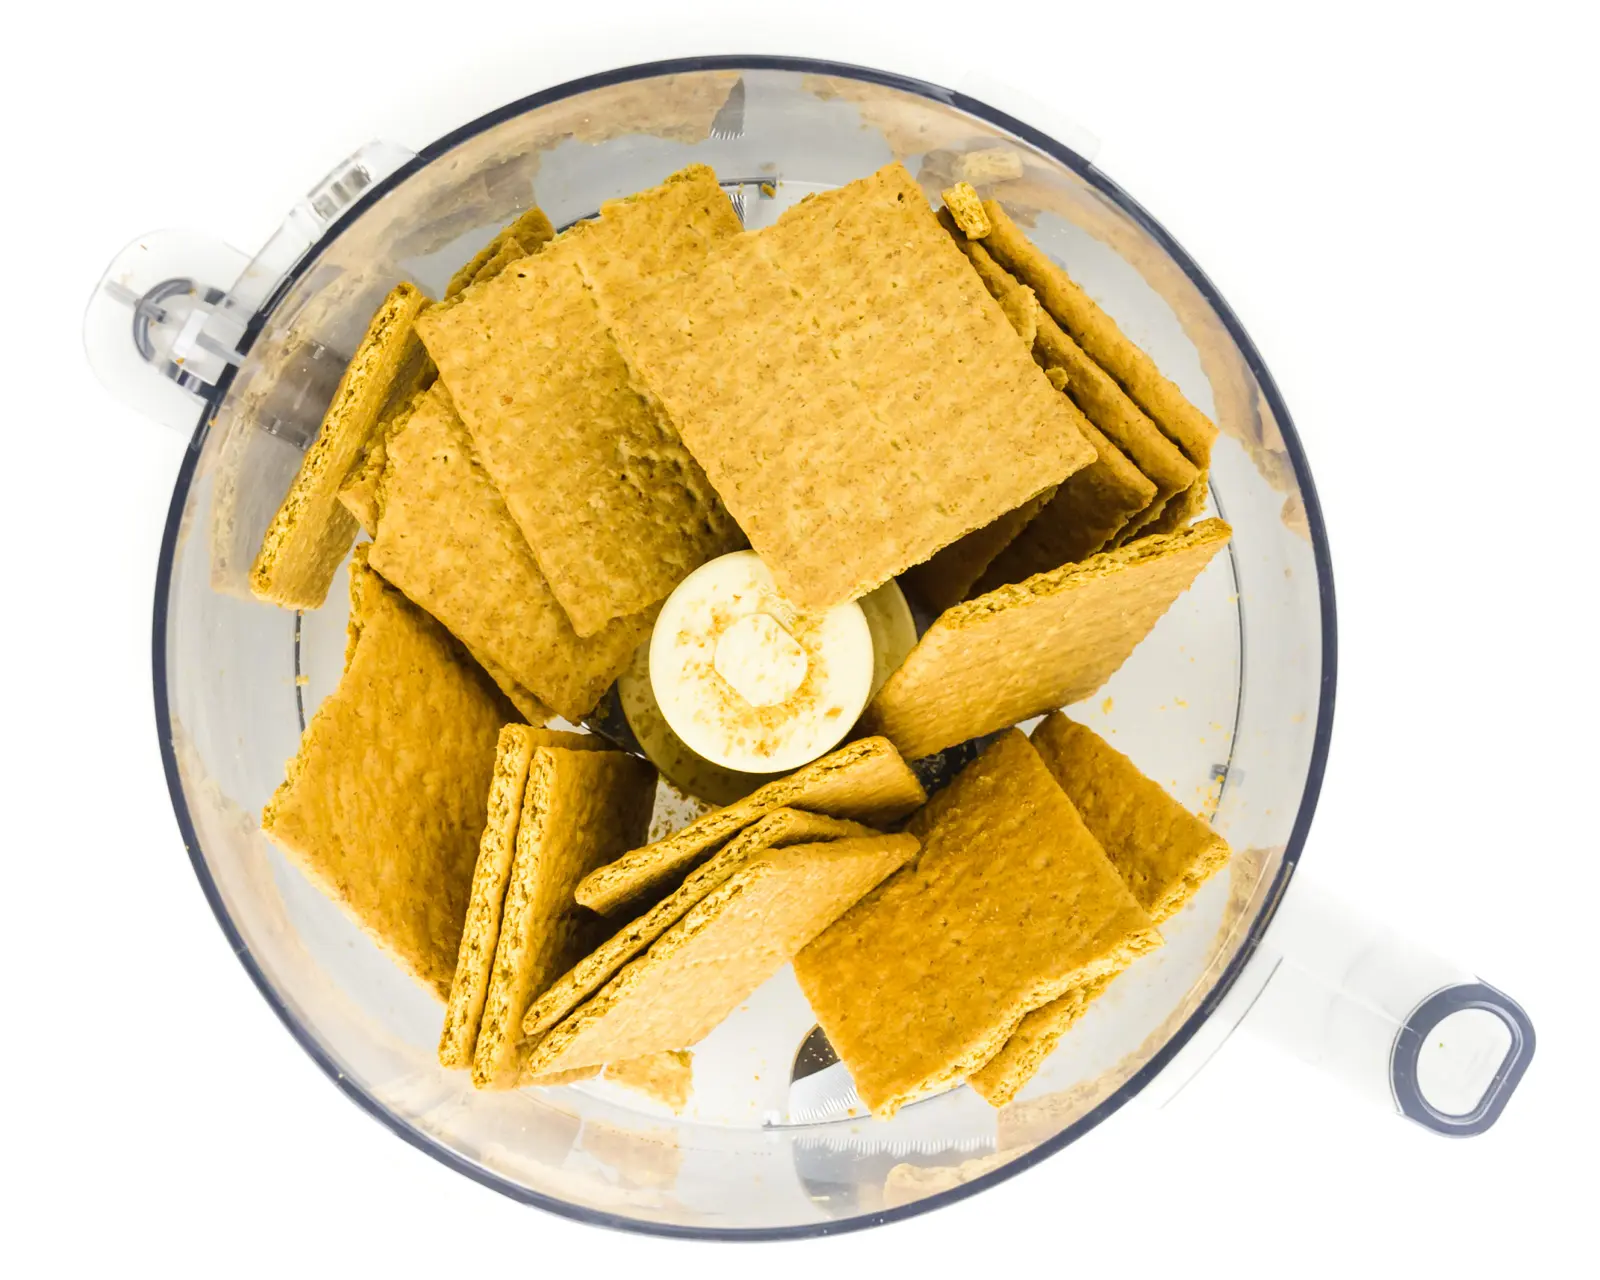 Graham crackers are in the bottom of a food processor bowl.